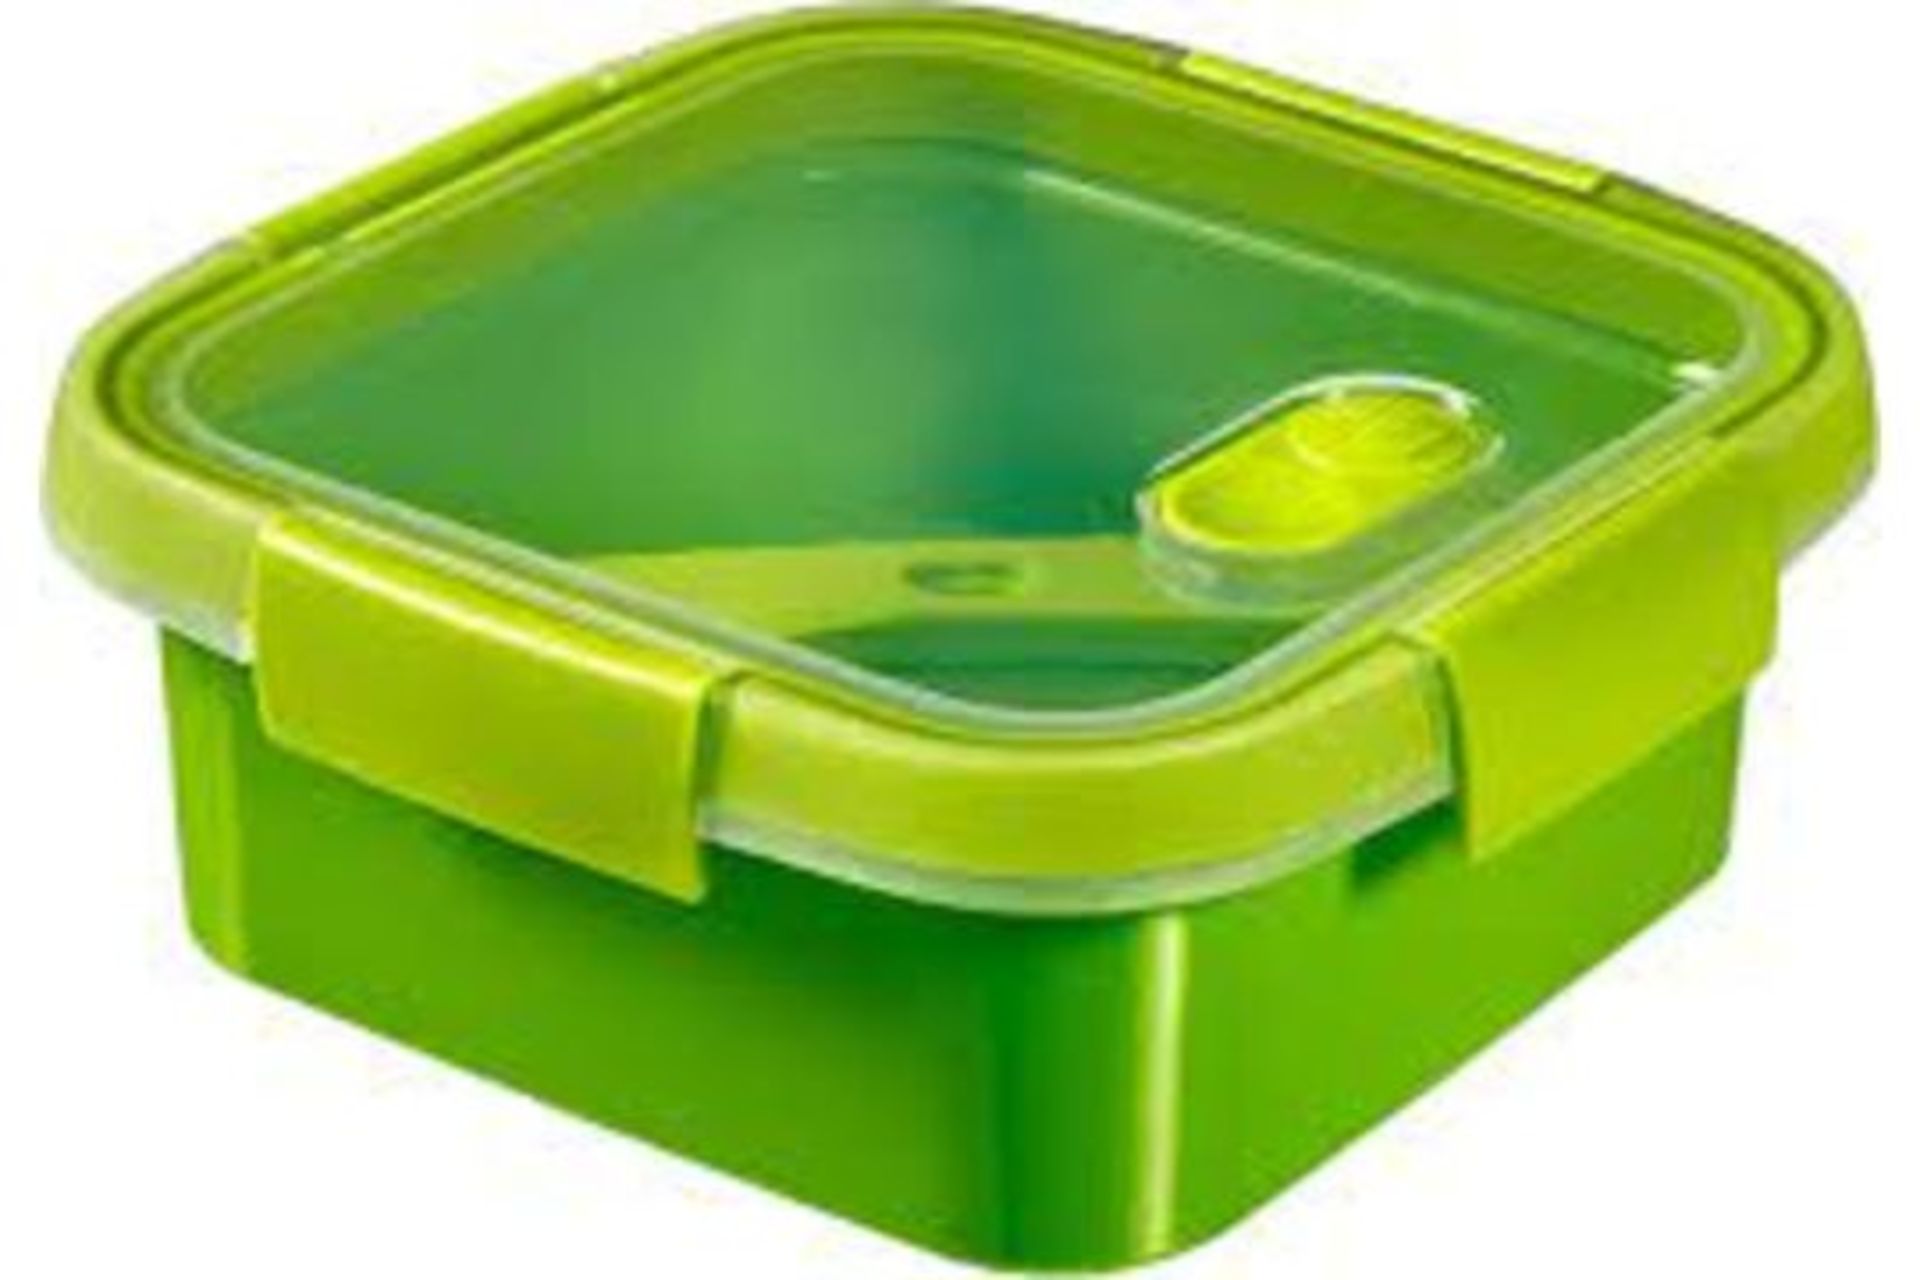 20 x NEW Curver Smart To Go - Square Lunch Box Storage Container with Knife, Fork & Spoon - Green,